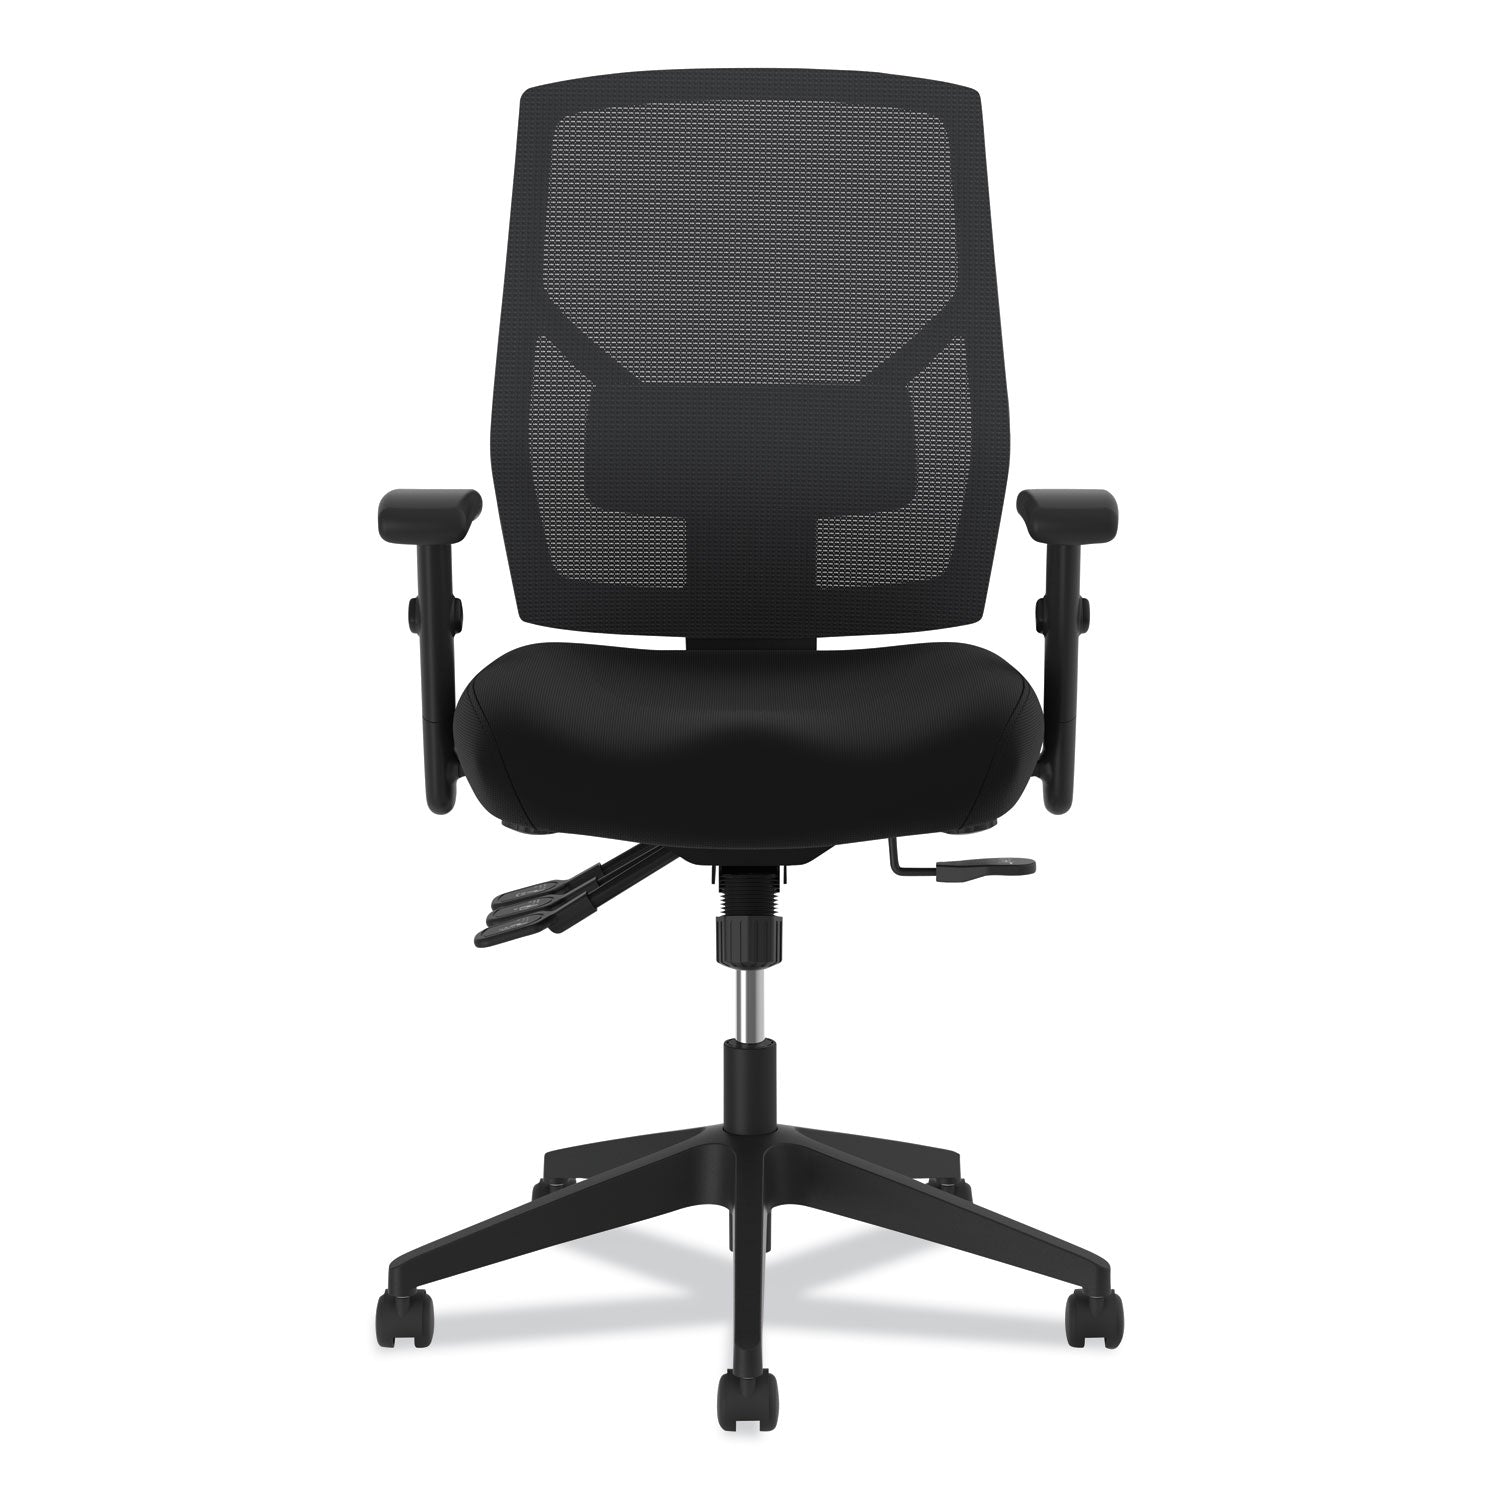 crio-high-back-task-chair-with-asynchronous-control-supports-up-to-250-lb-18-to-22-seat-height-black_bsxvl582sb11t - 2